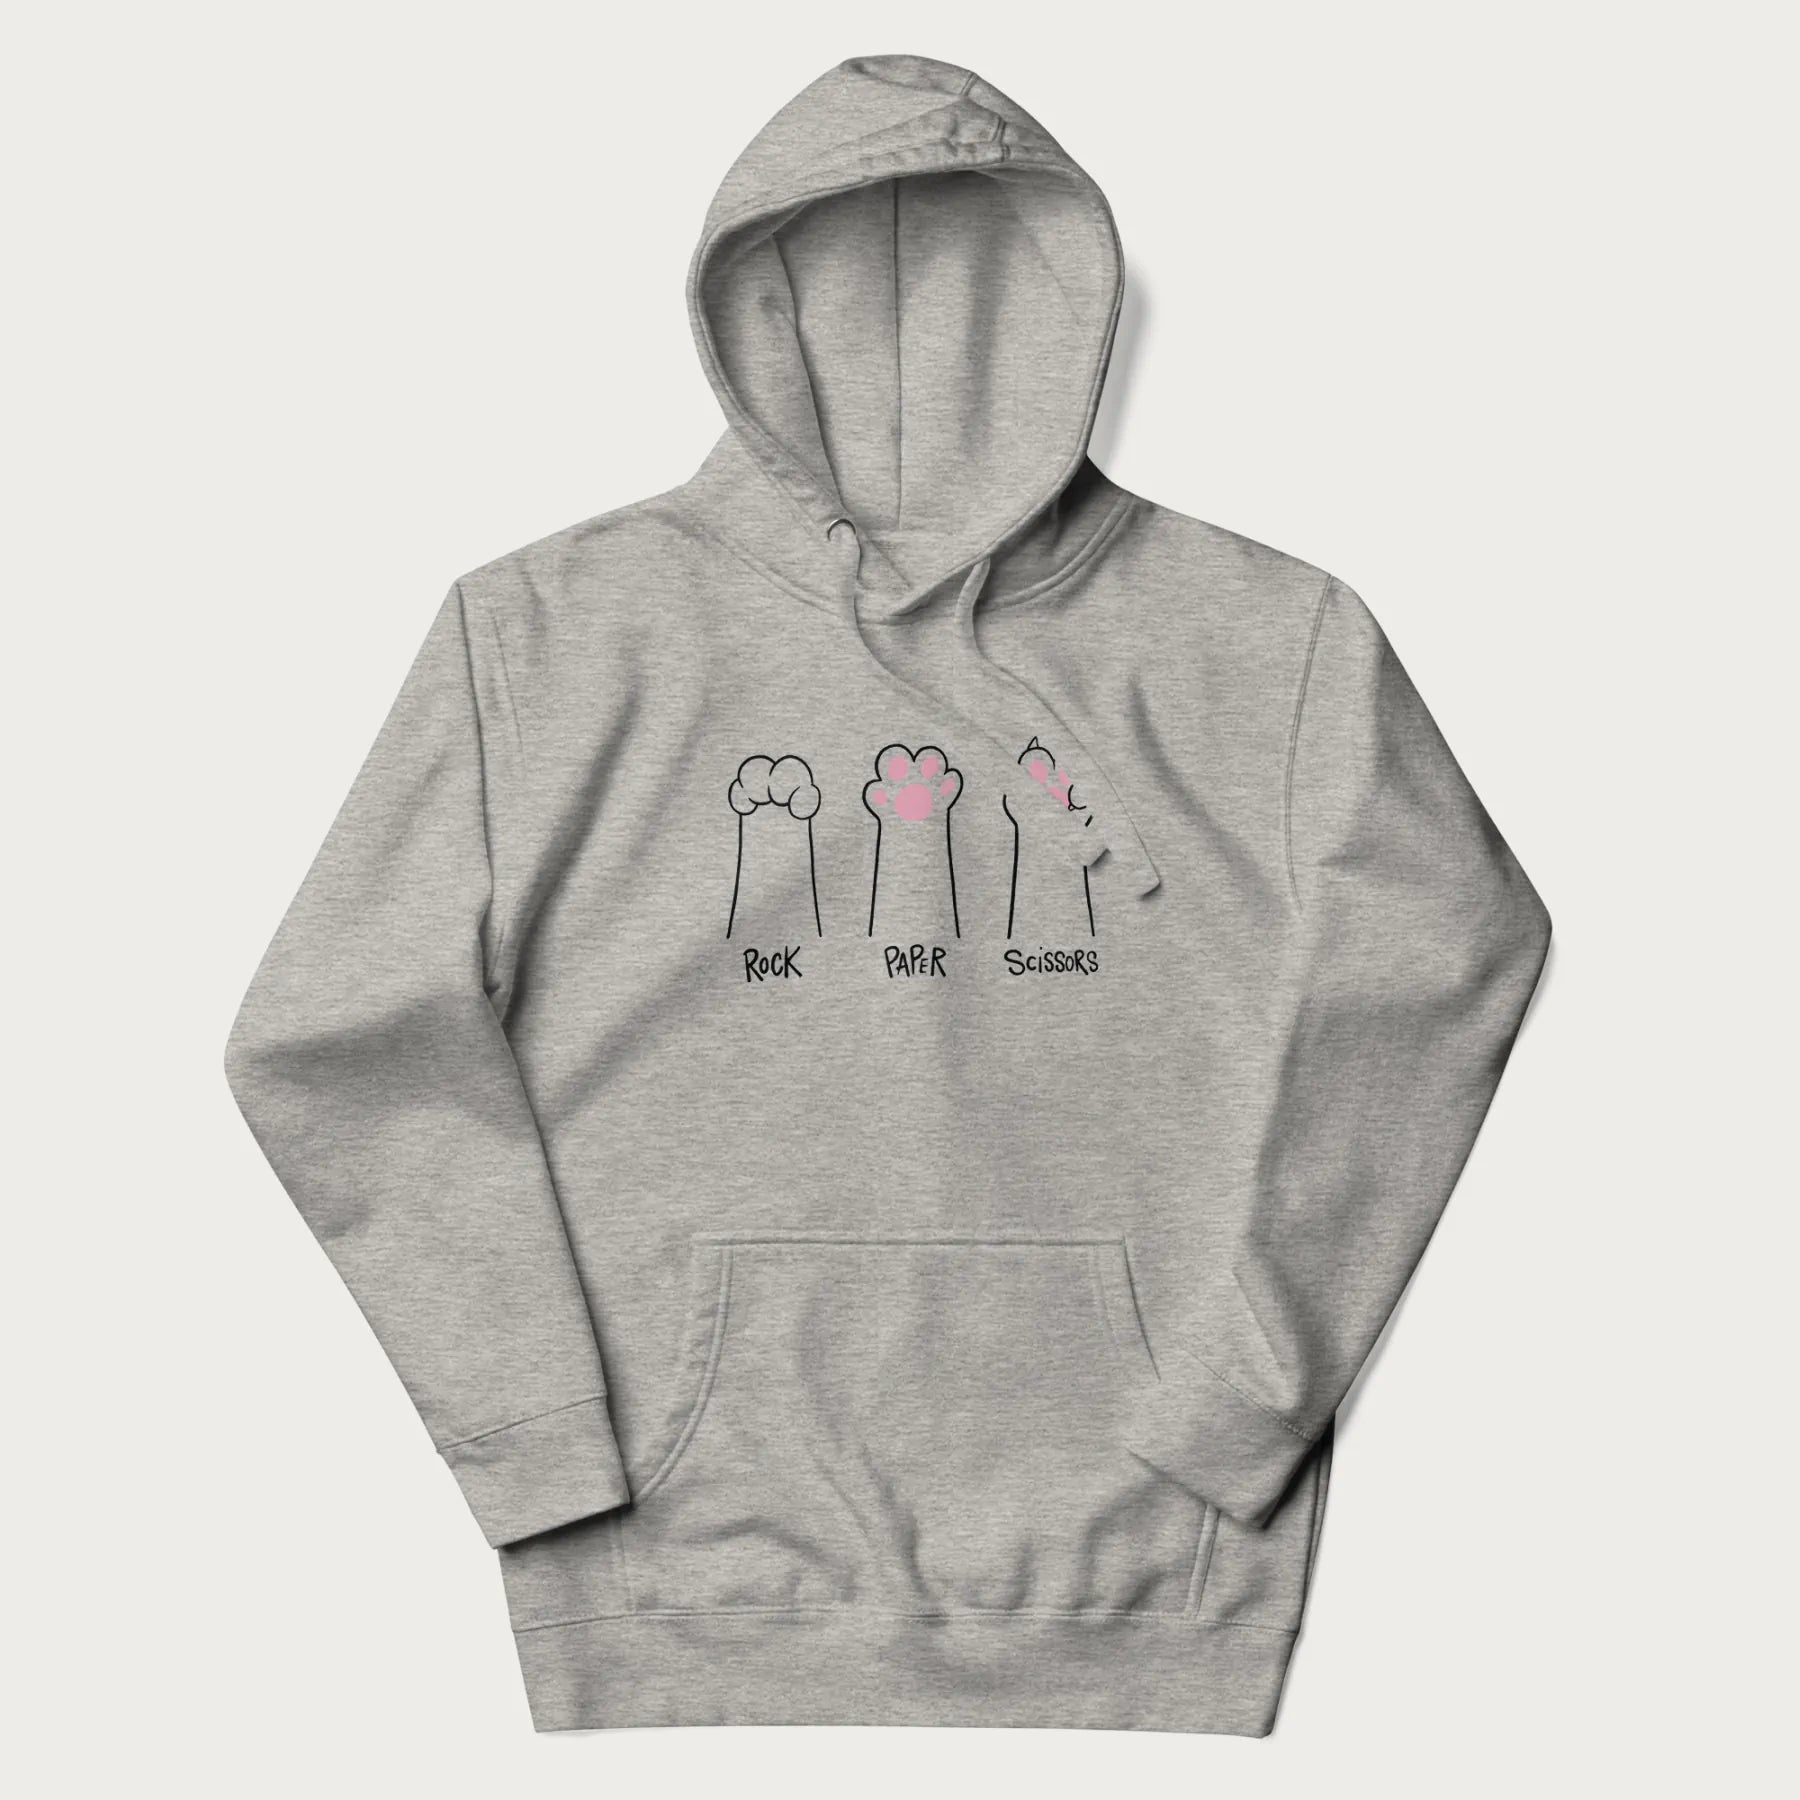 Light grey hoodie with graphic of cat paws playing rock-paper-scissors.